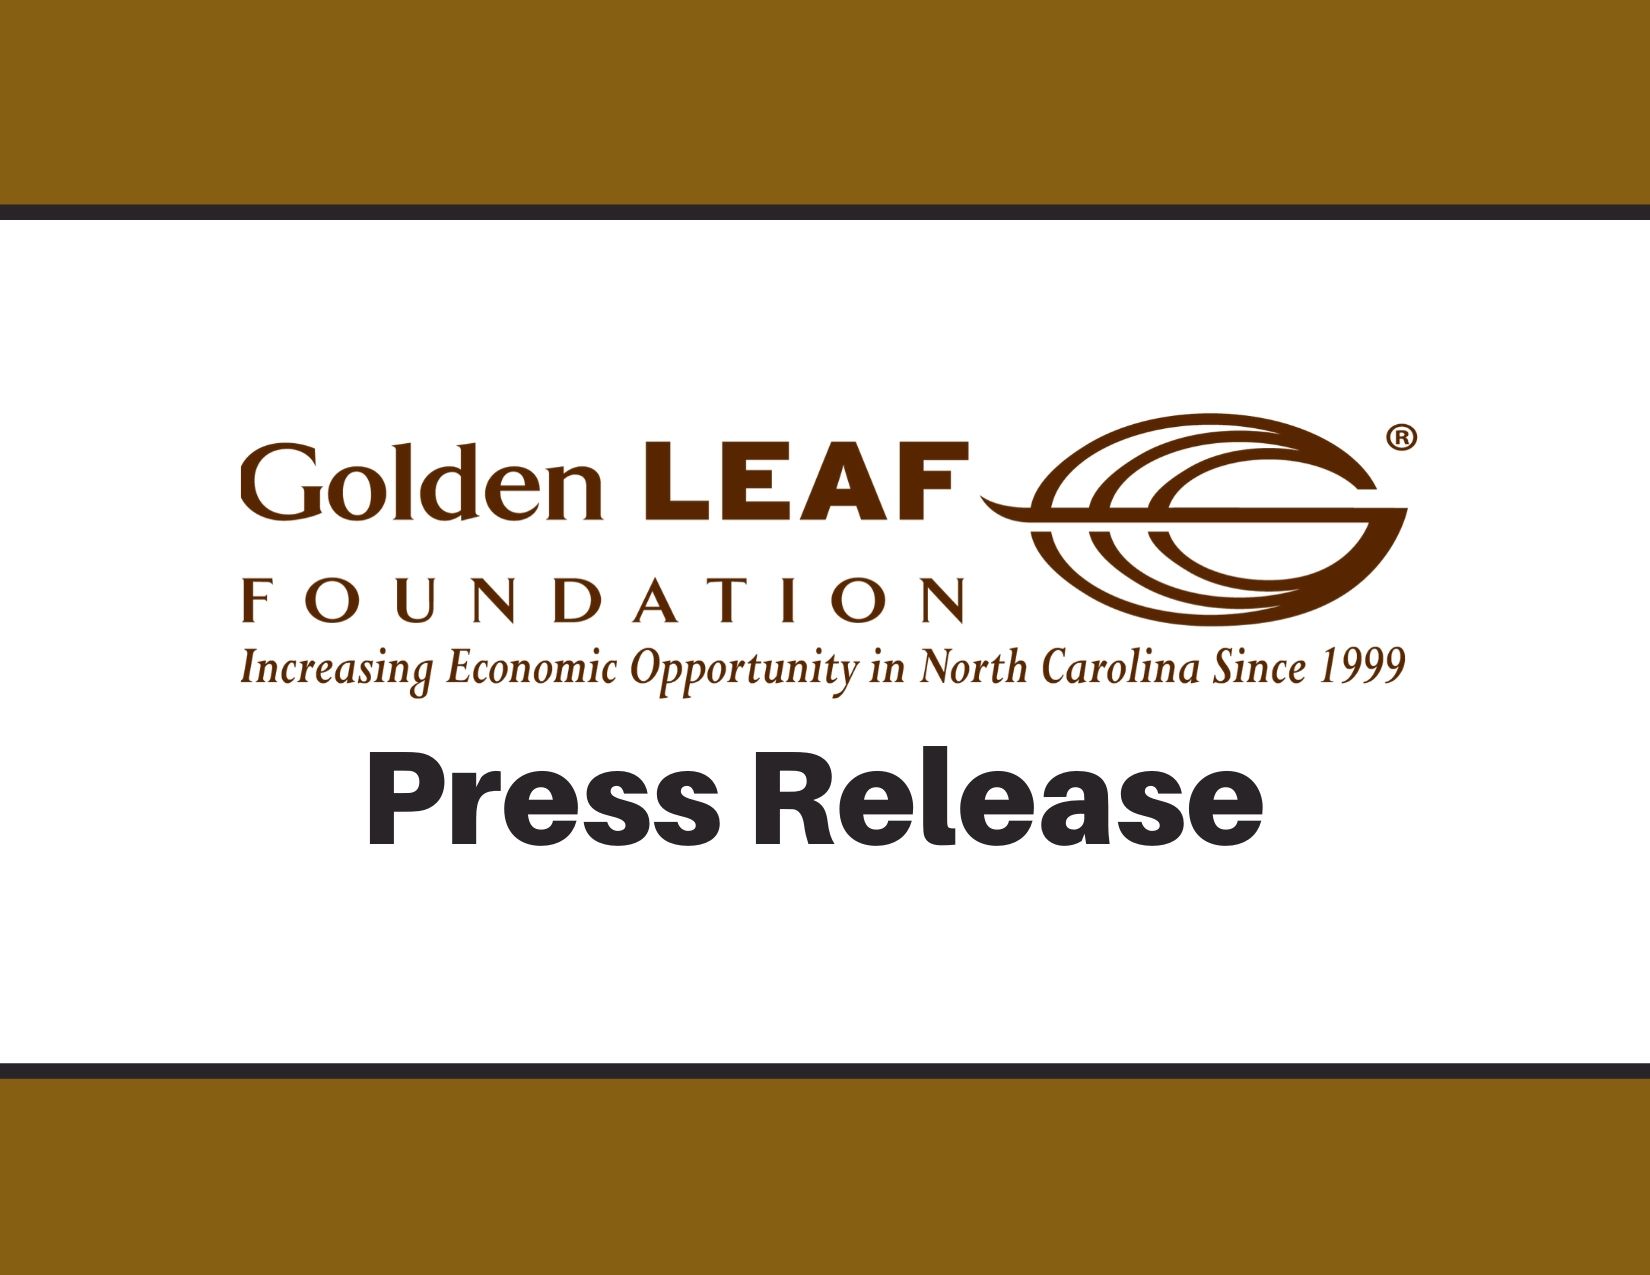 Golden LEAF announces $12.2 million in funding, welcomes new Board members